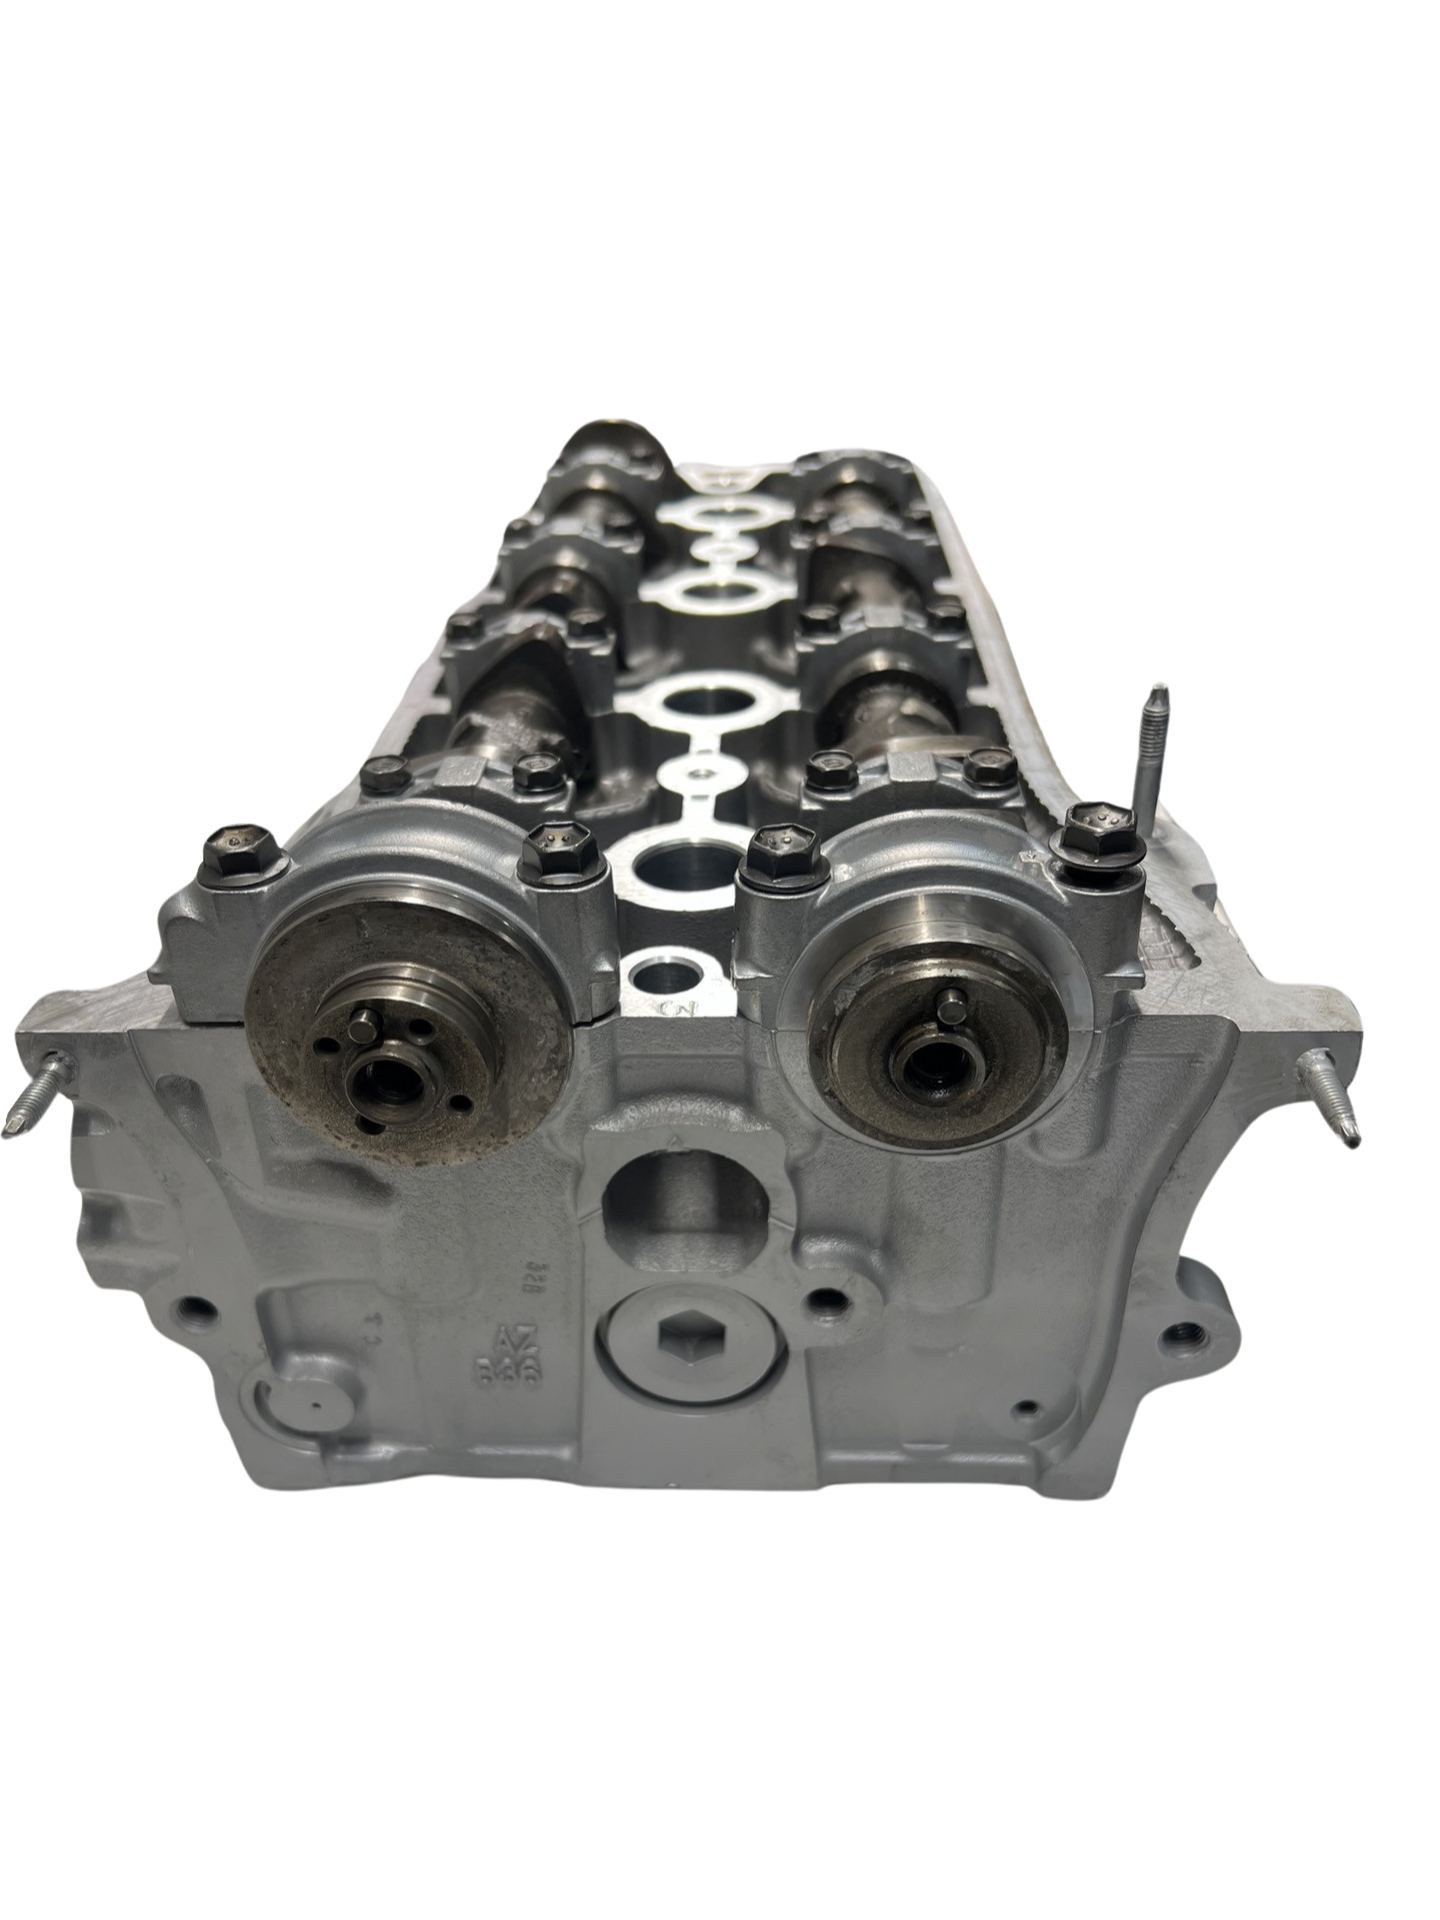 Front view of cylinder head for a Toyota 2.4L DOHC 2AZ-FE